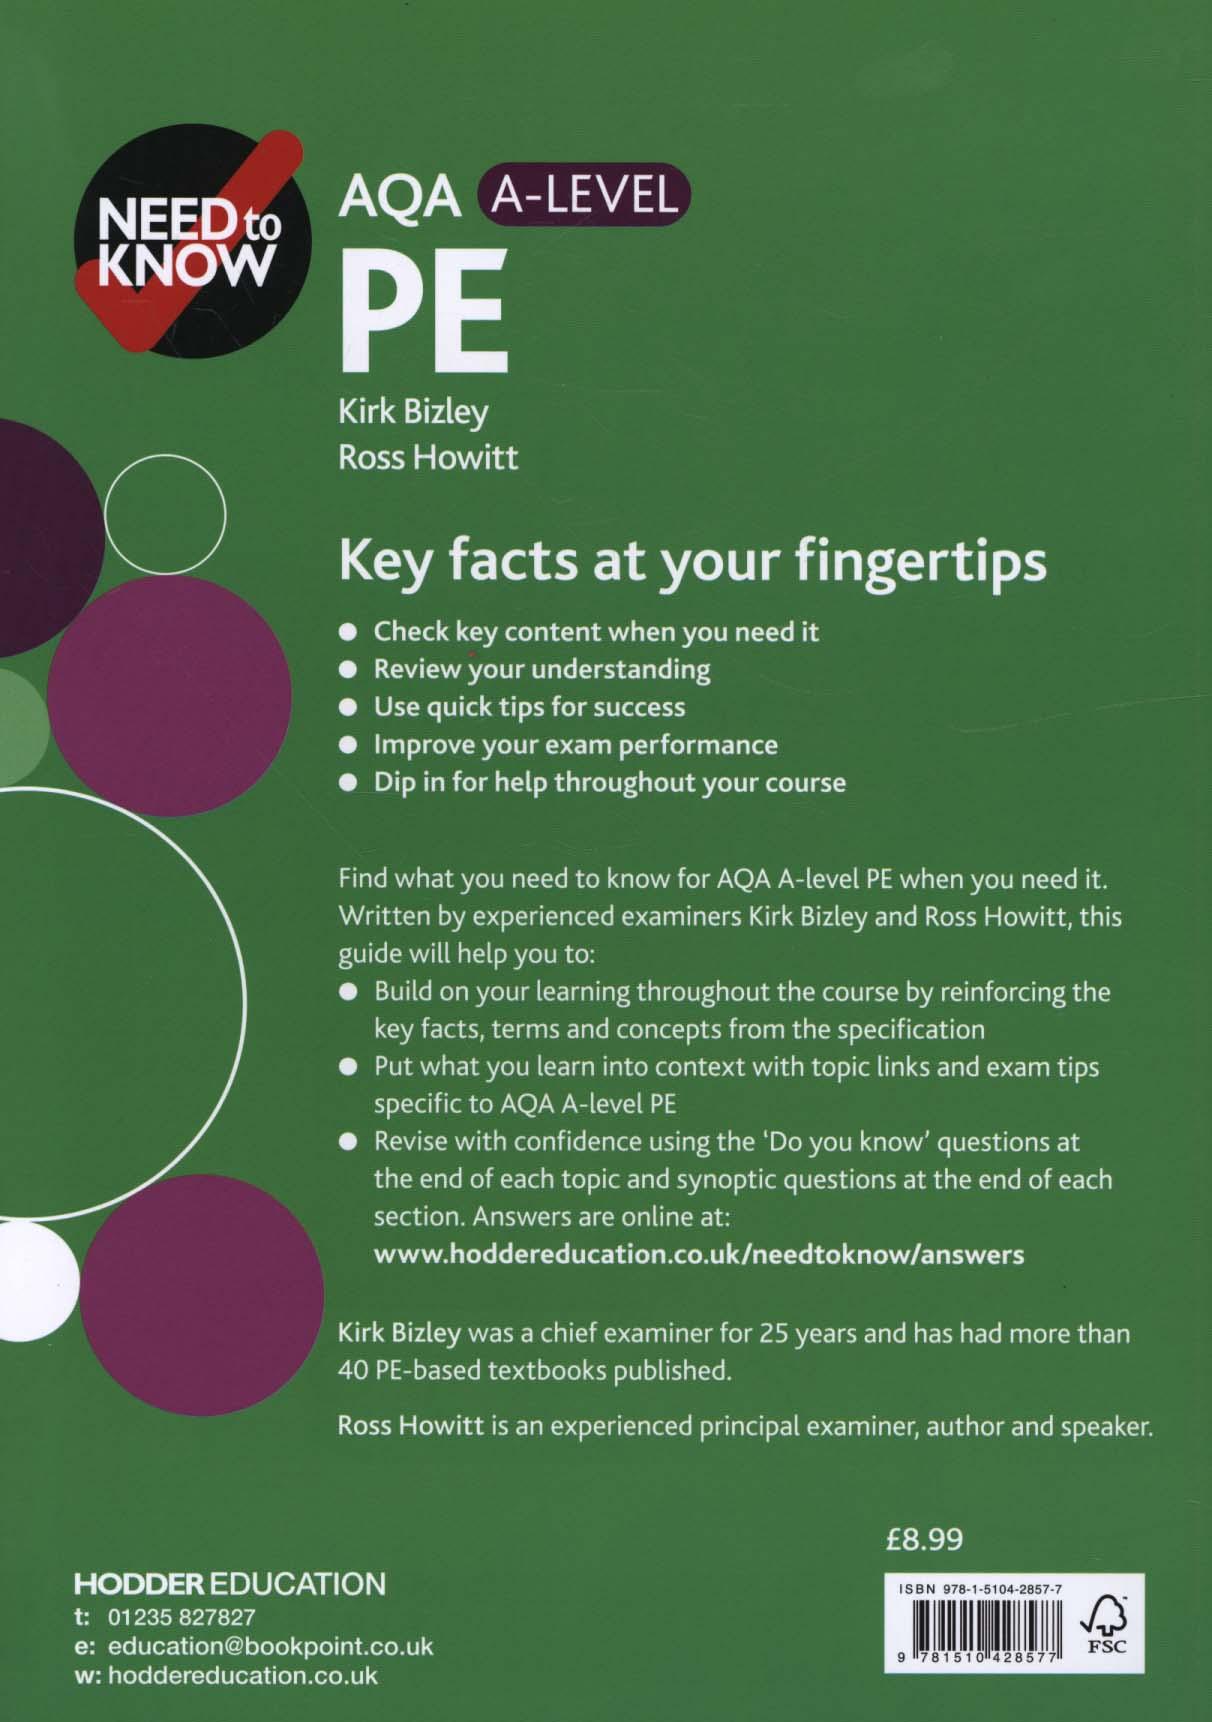 Need to Know: AQA A-level PE